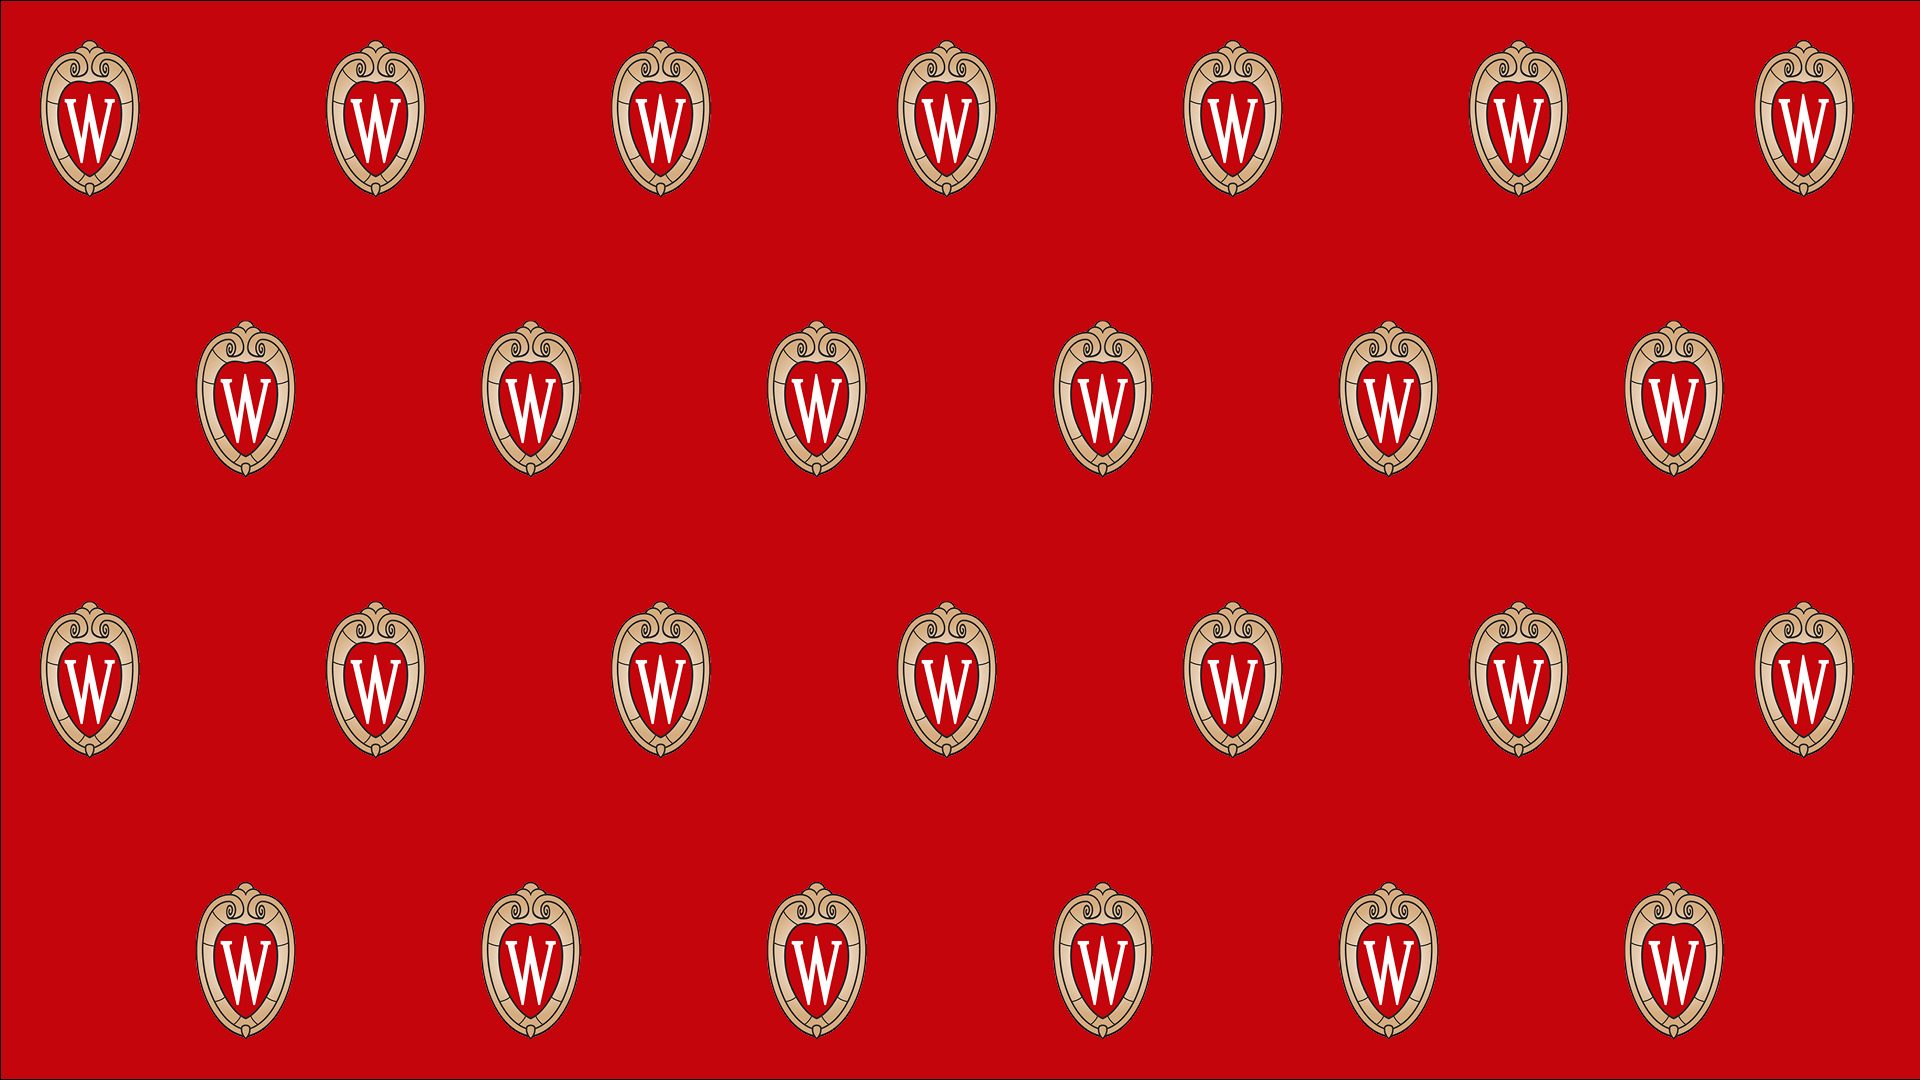 red meeting background tiled with UW crest